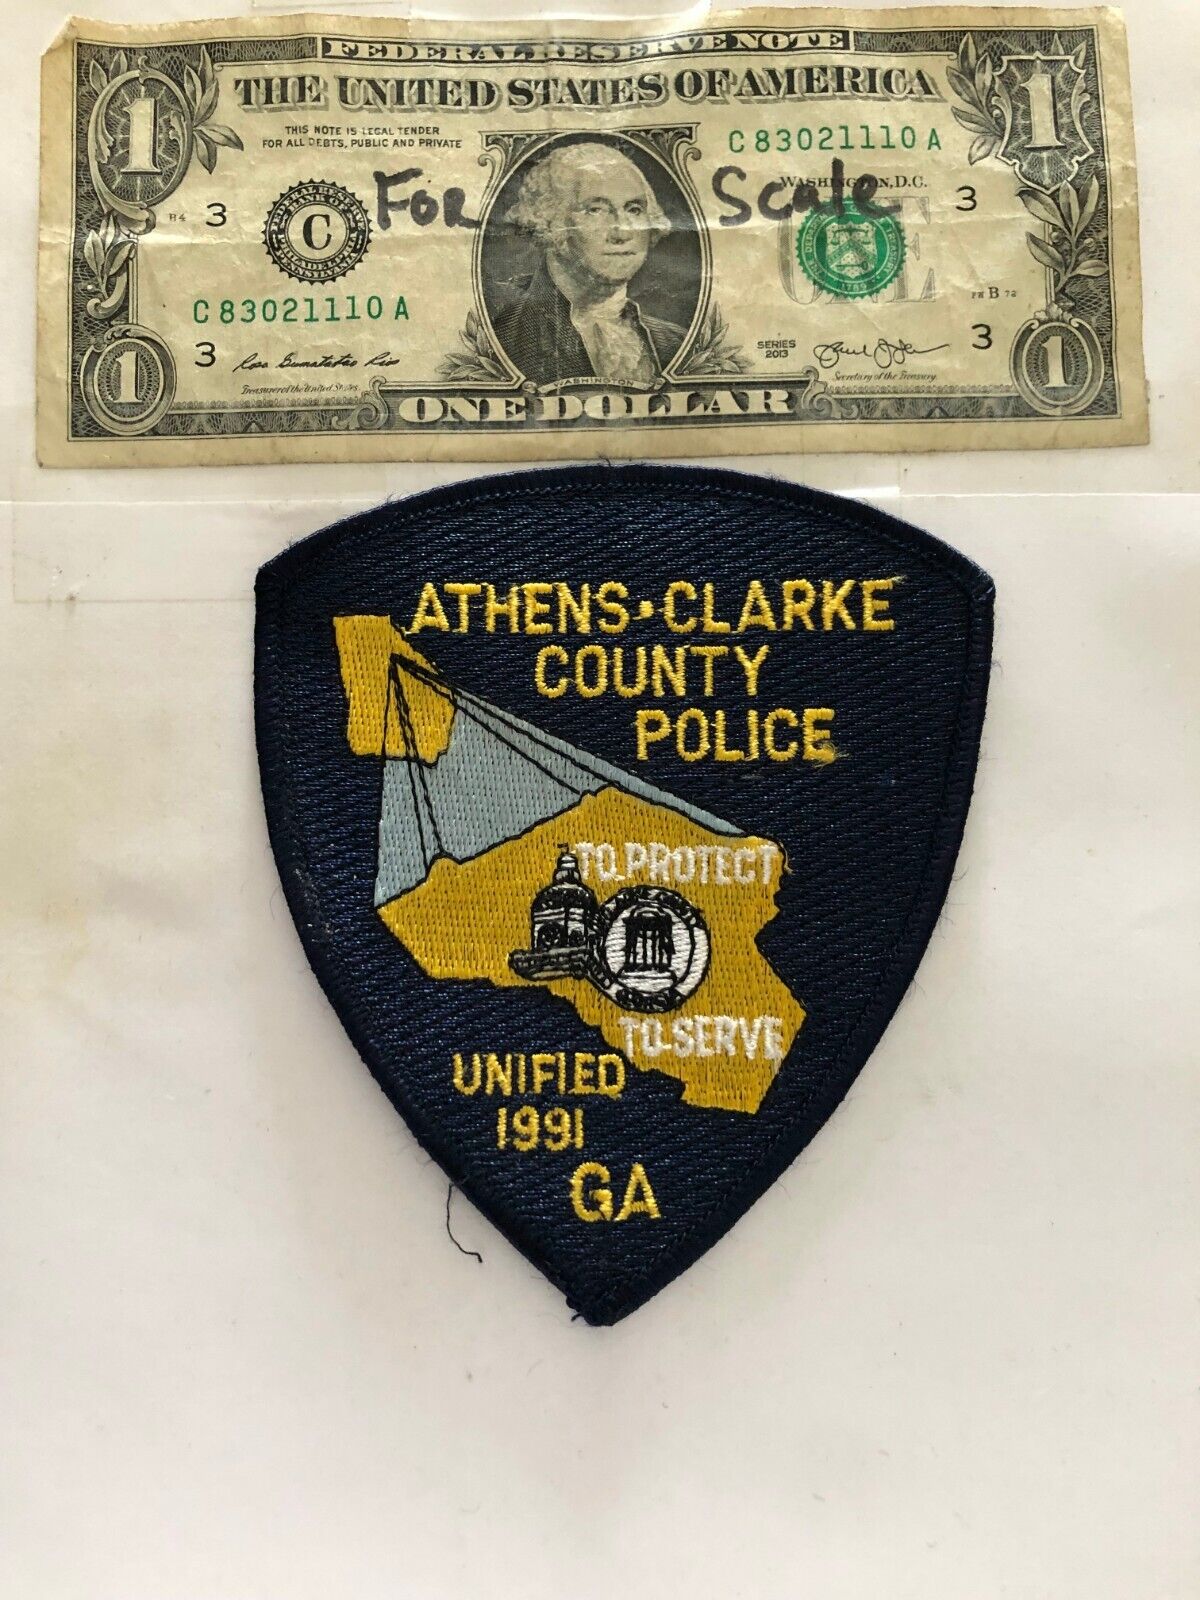 Athens Clark County Georgia Police Patch Un-sewn great condition